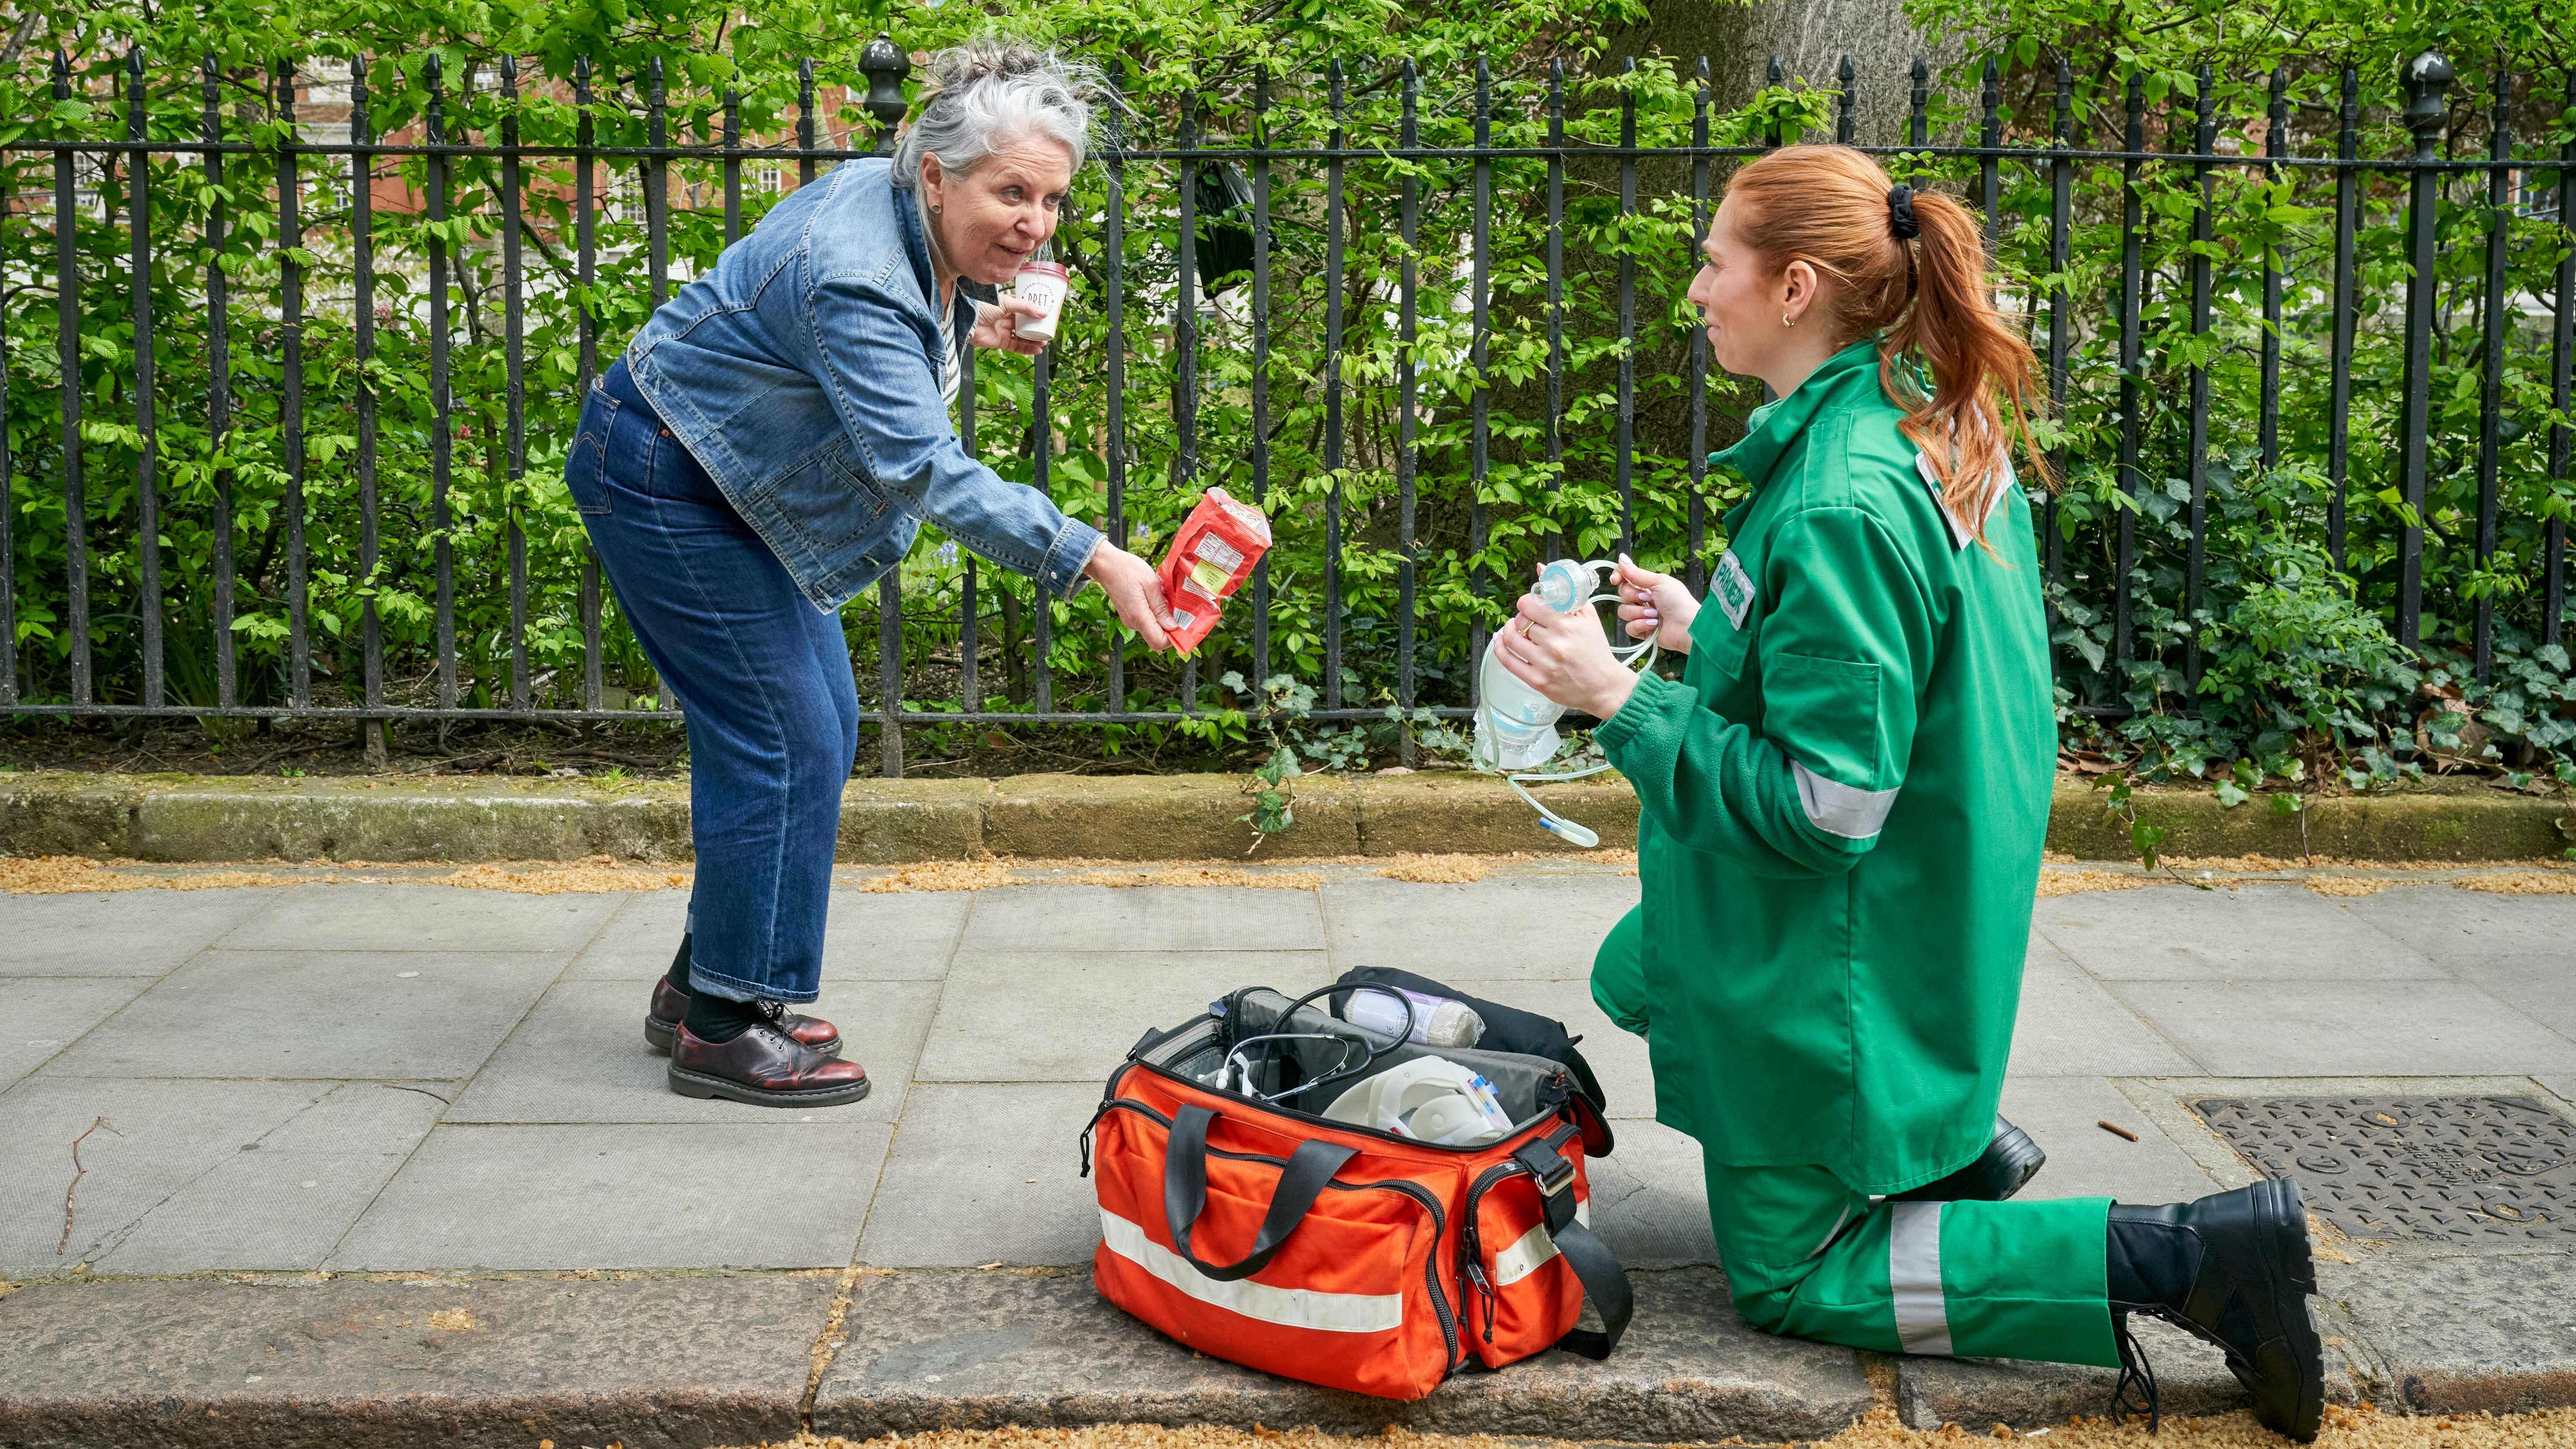 A paramedic in a green uniform kneels in the street with an emergency medical bag, while a strange woman bends to her to offer her a crisp.